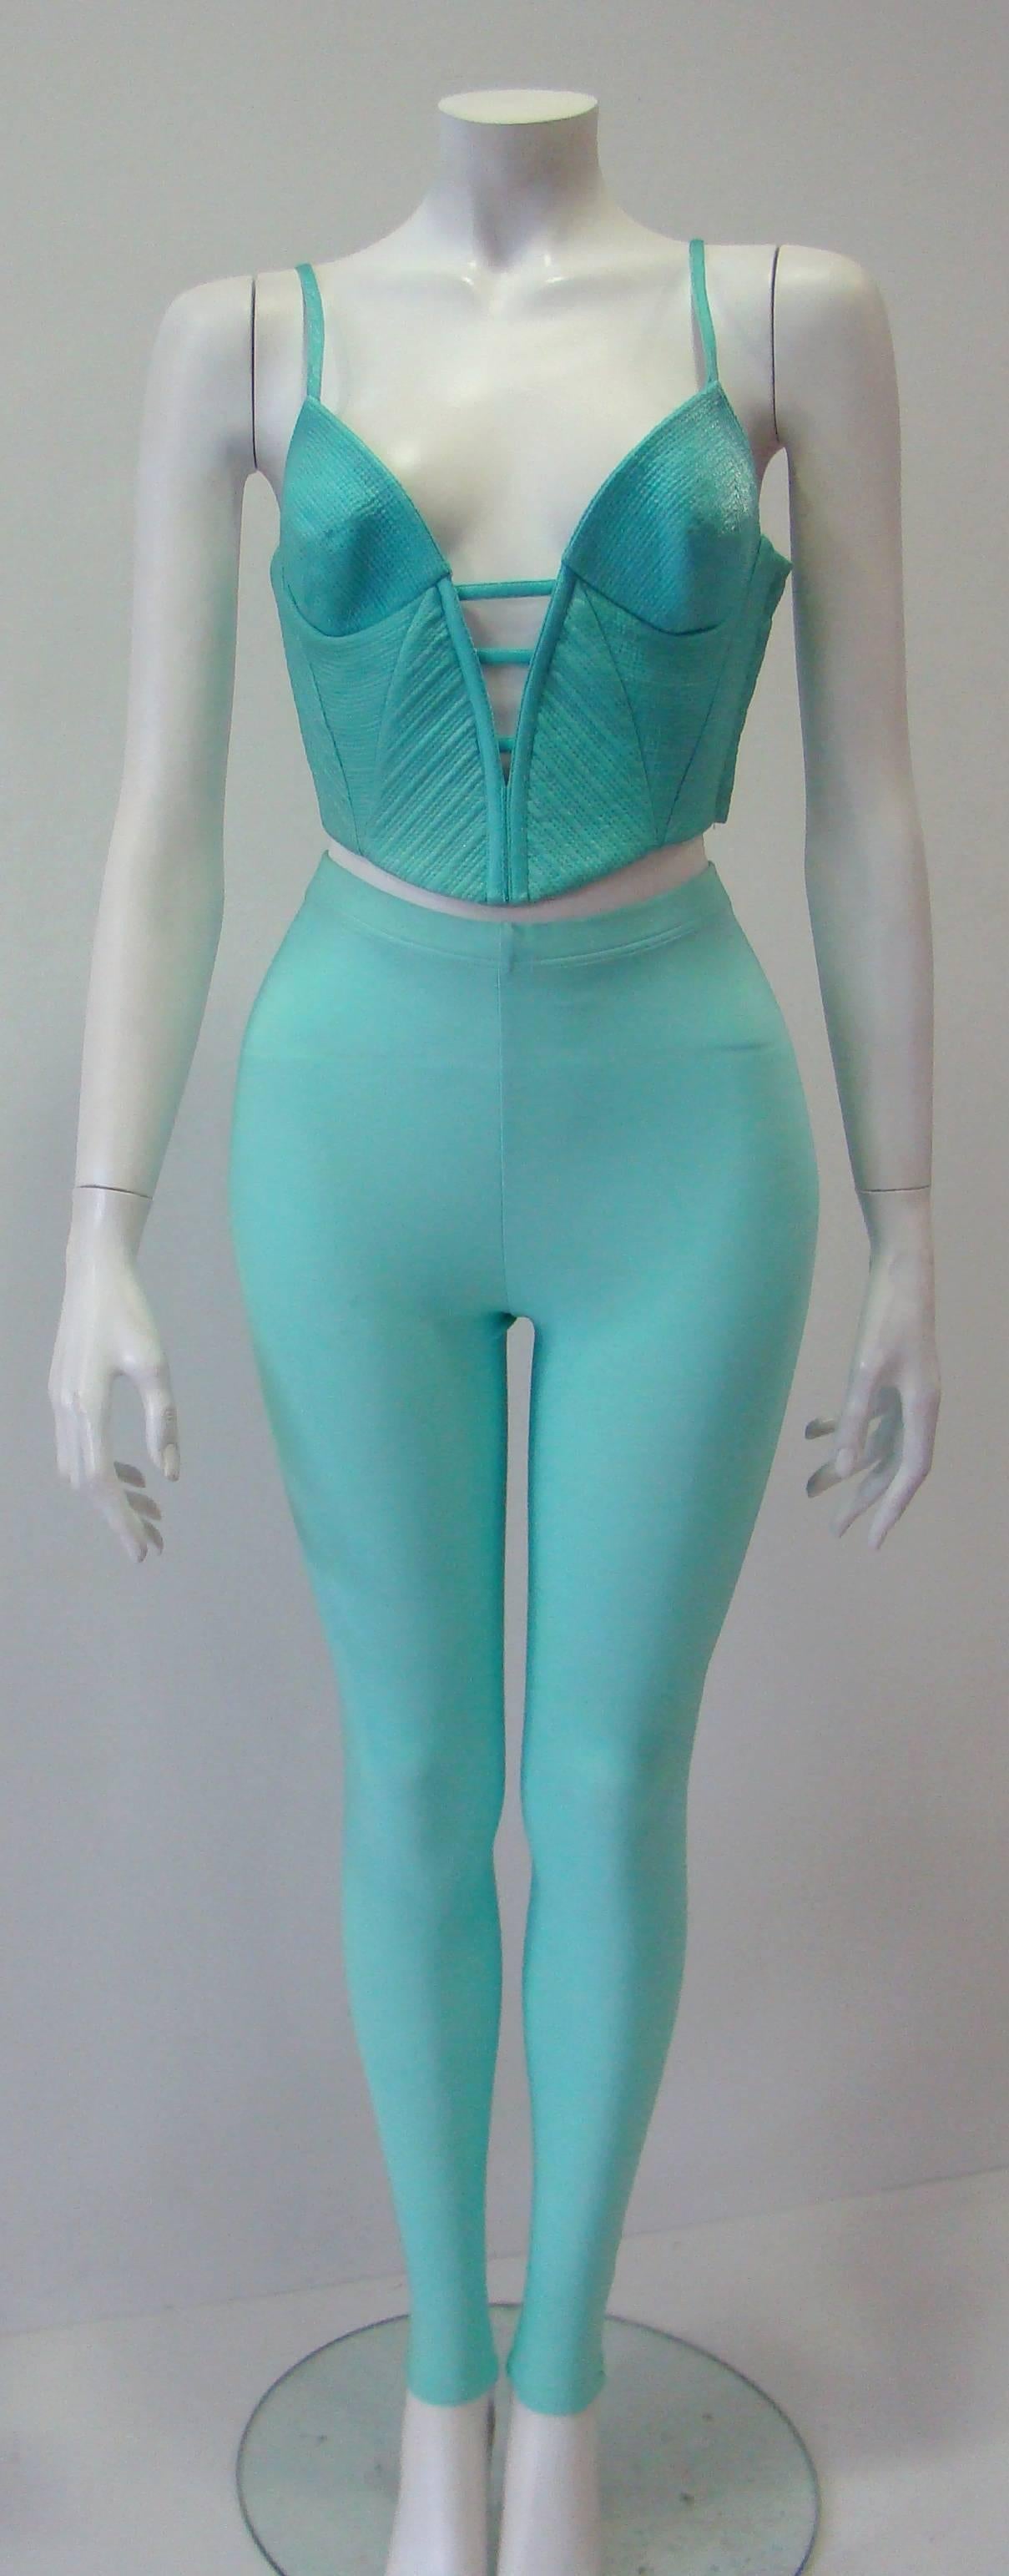 Gianni Versace Couture Turquoise Stretch Leggings For Sale 2